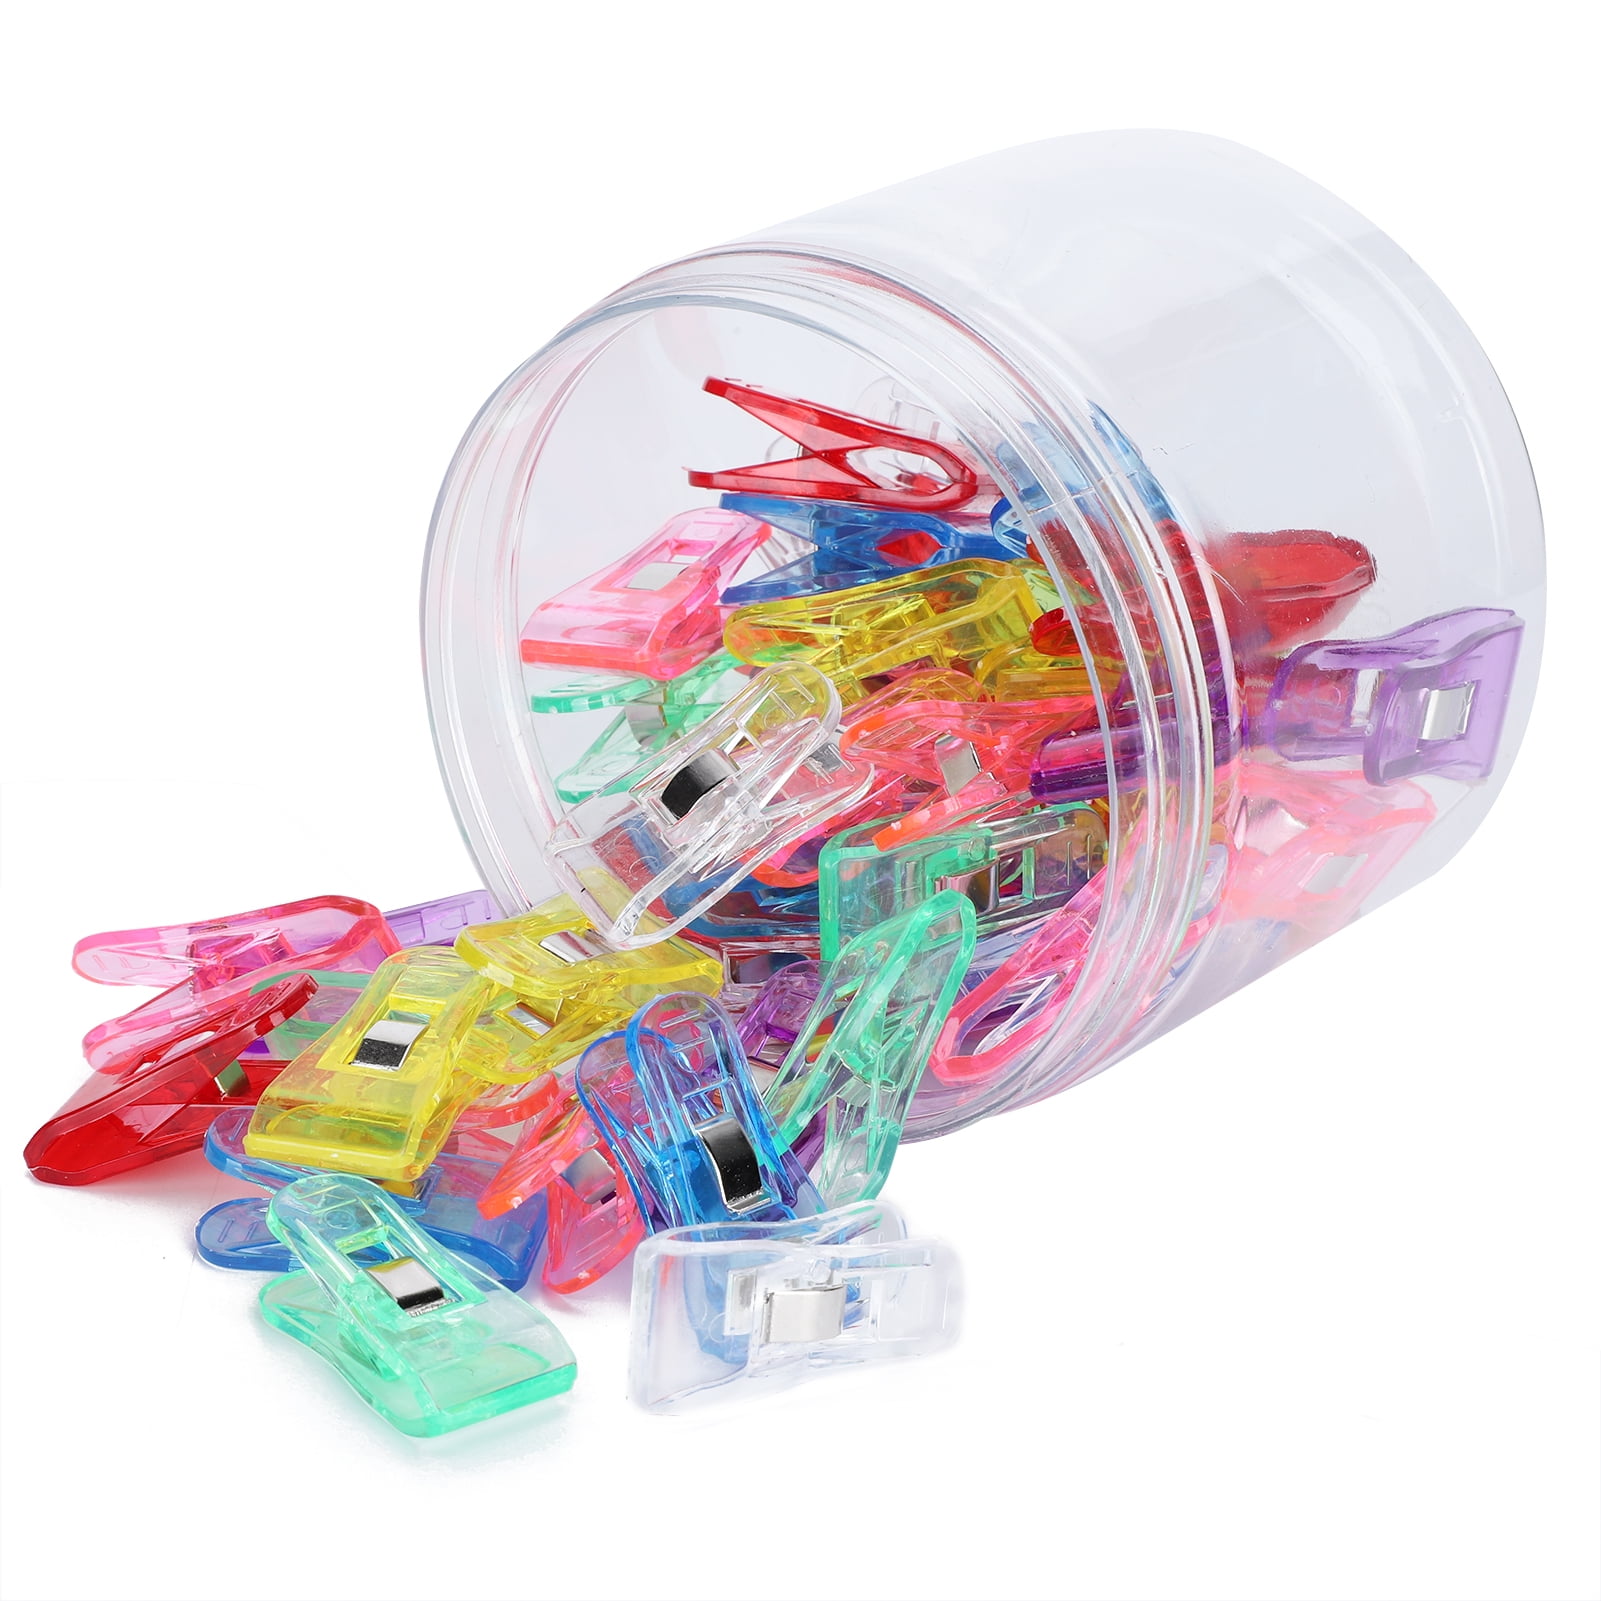 Mr. Pen- Sewing Clips, 30 pcs, Assorted Colors, Sewing Clips for